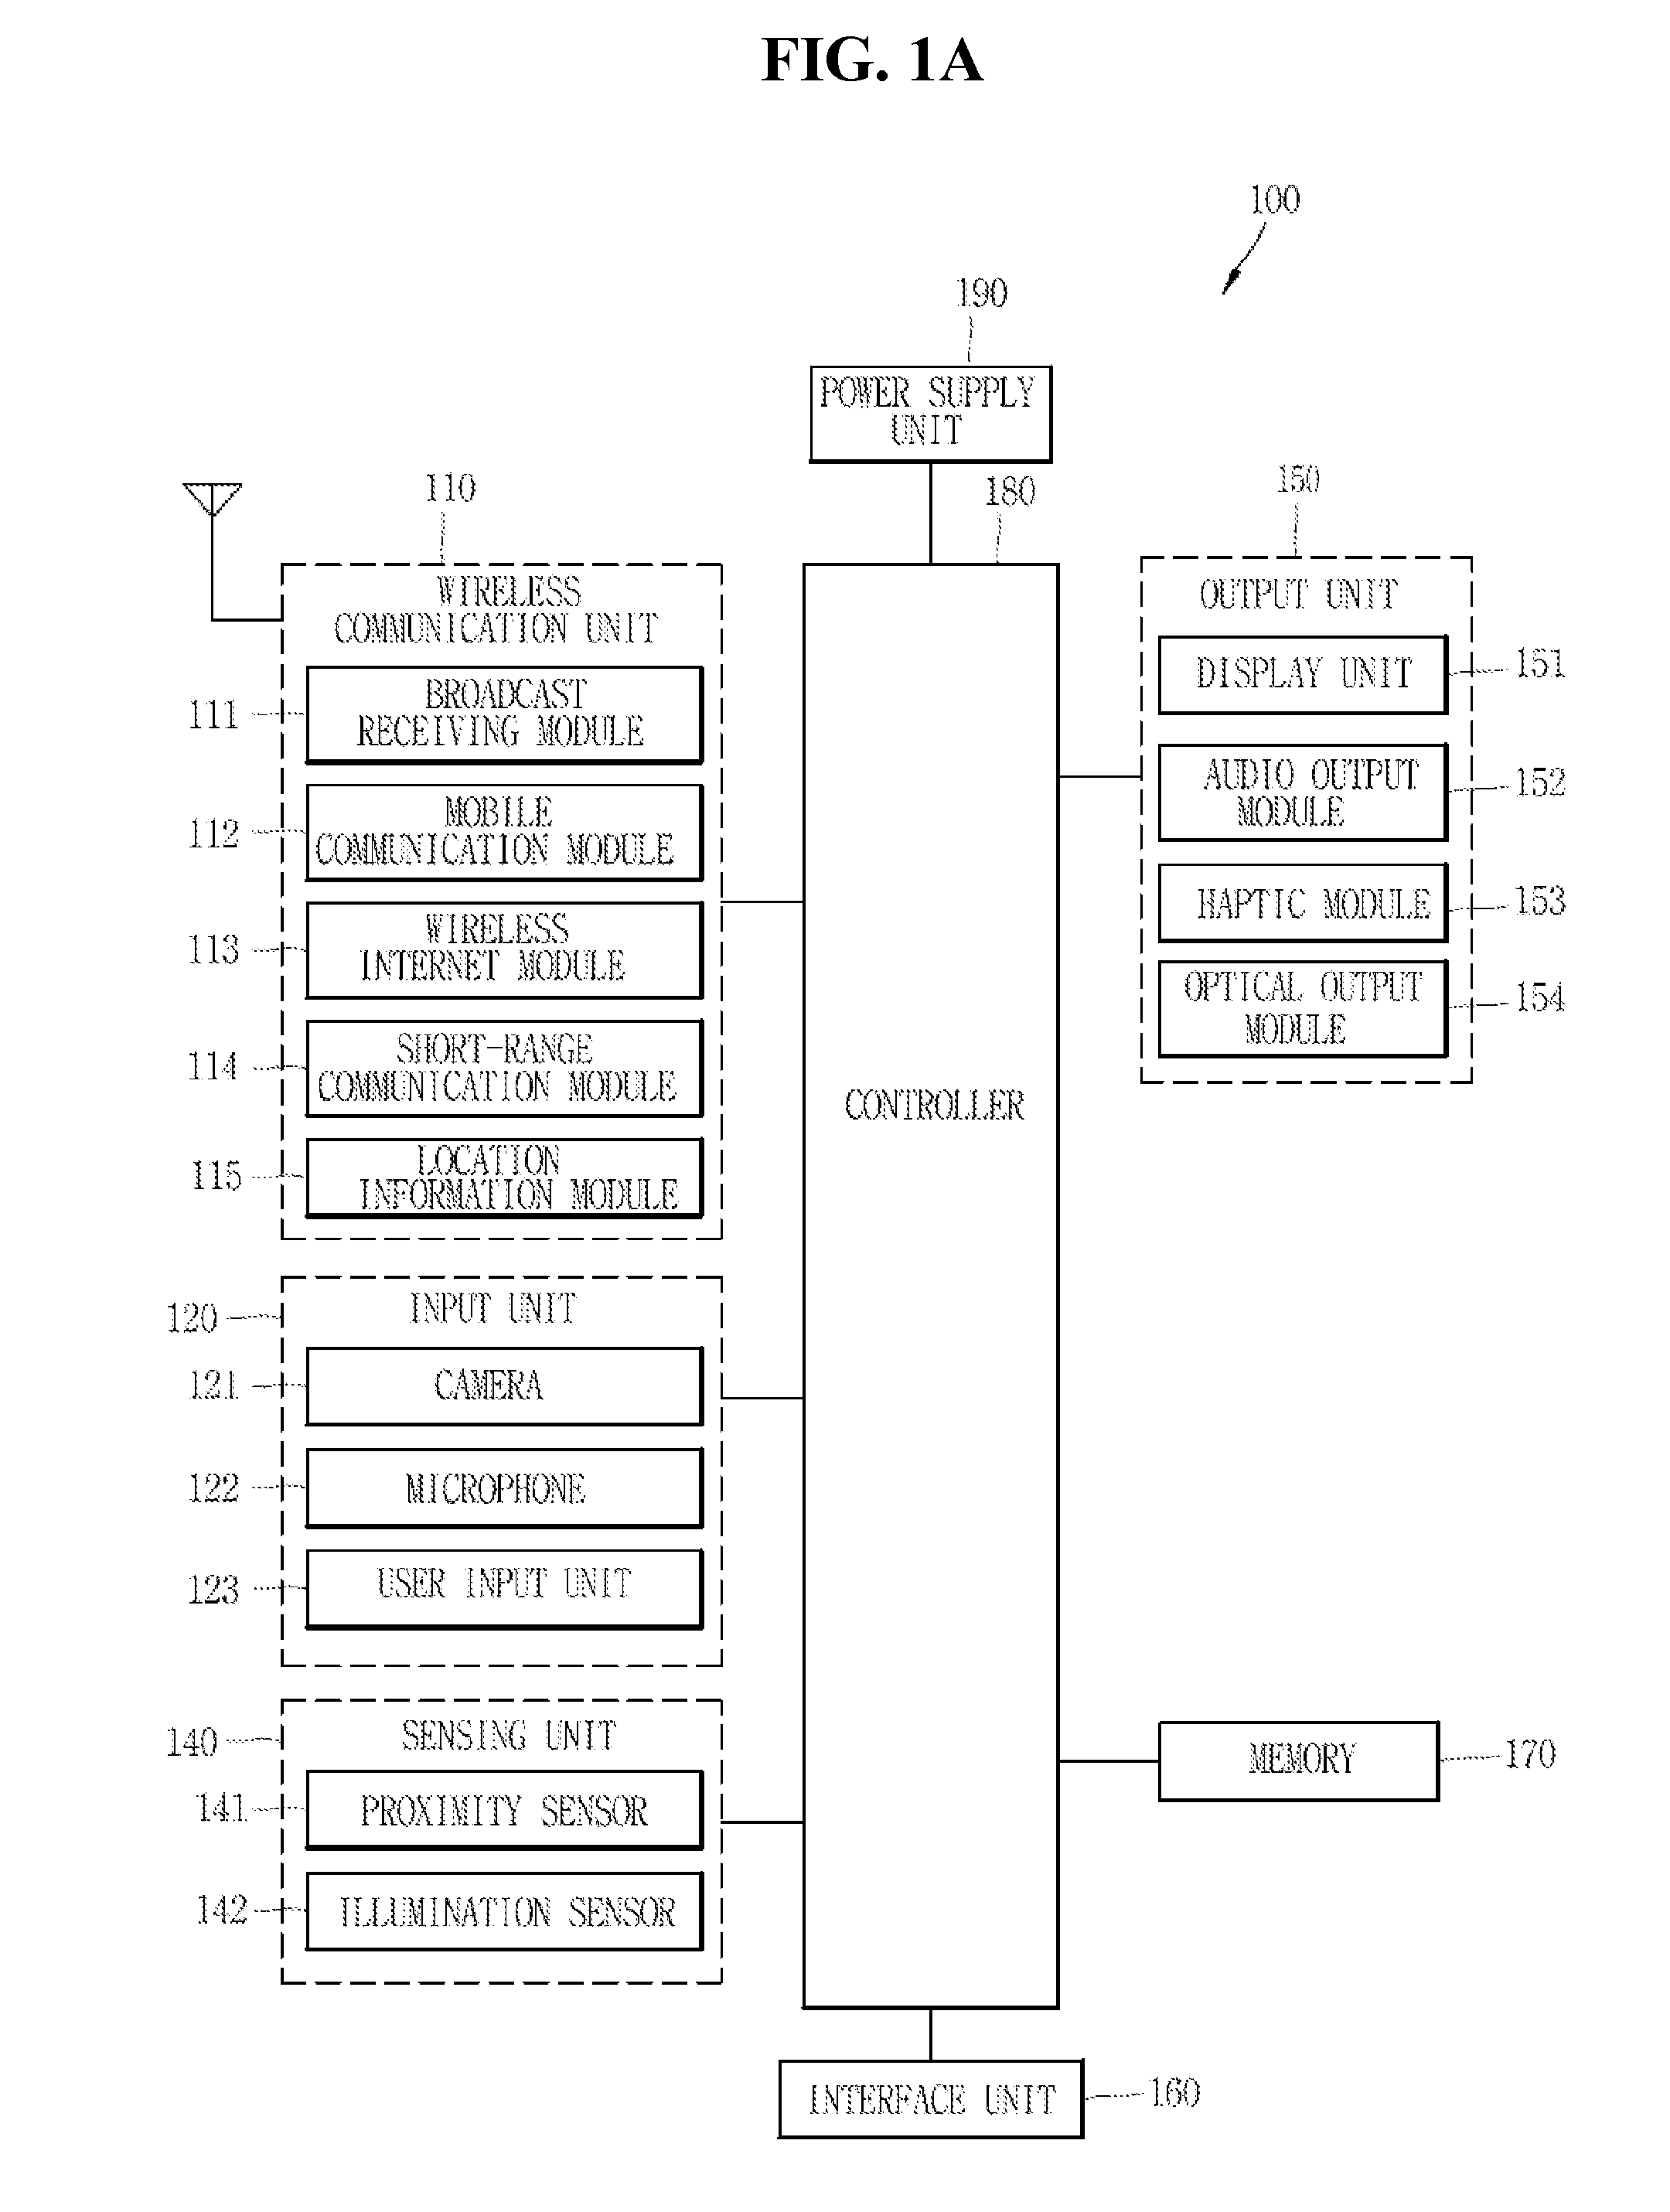 Method of sharing traffic accident information and mobile terminal for the same